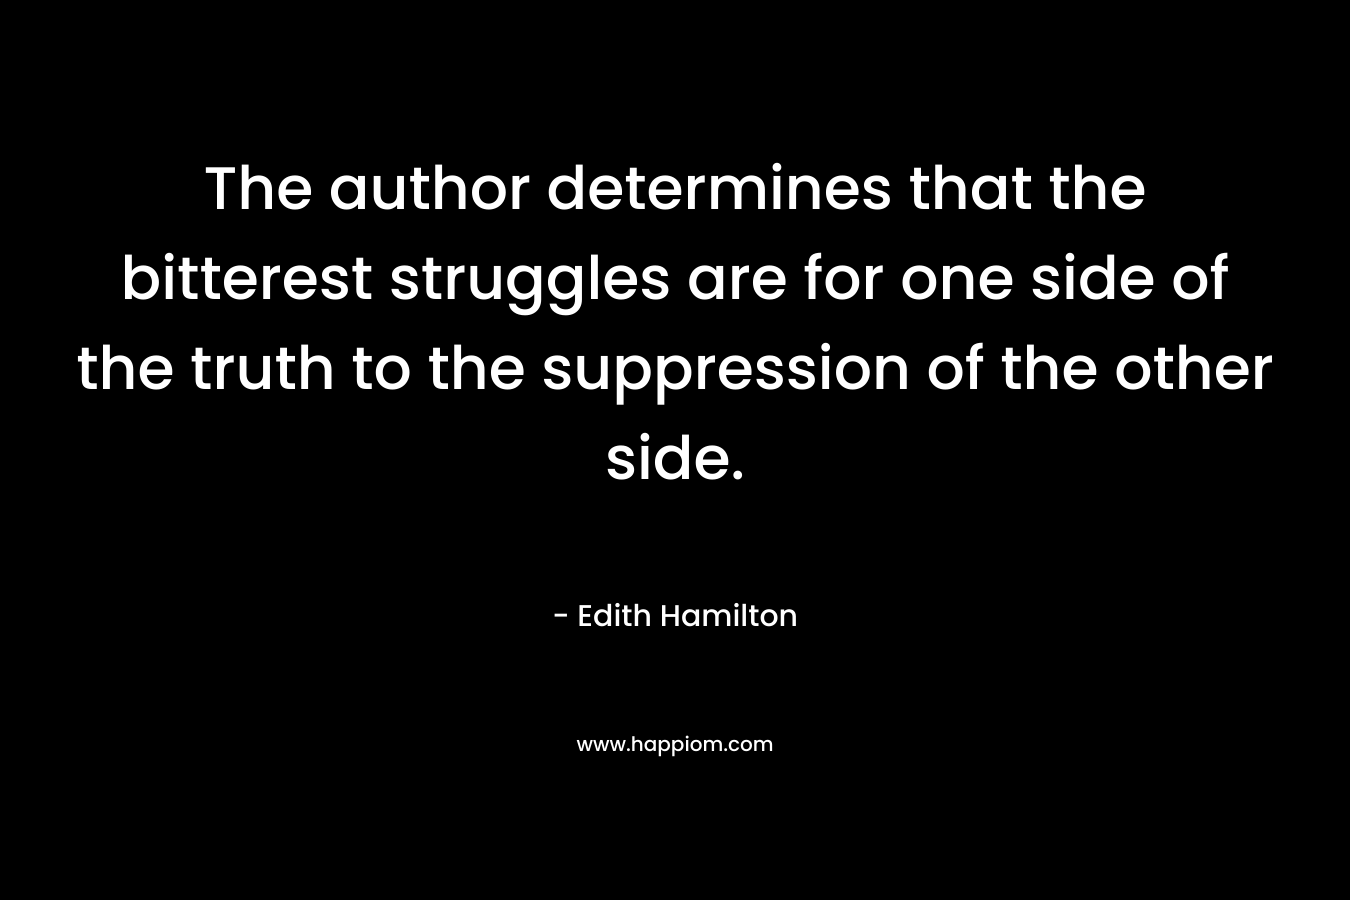 The author determines that the bitterest struggles are for one side of the truth to the suppression of the other side. – Edith Hamilton